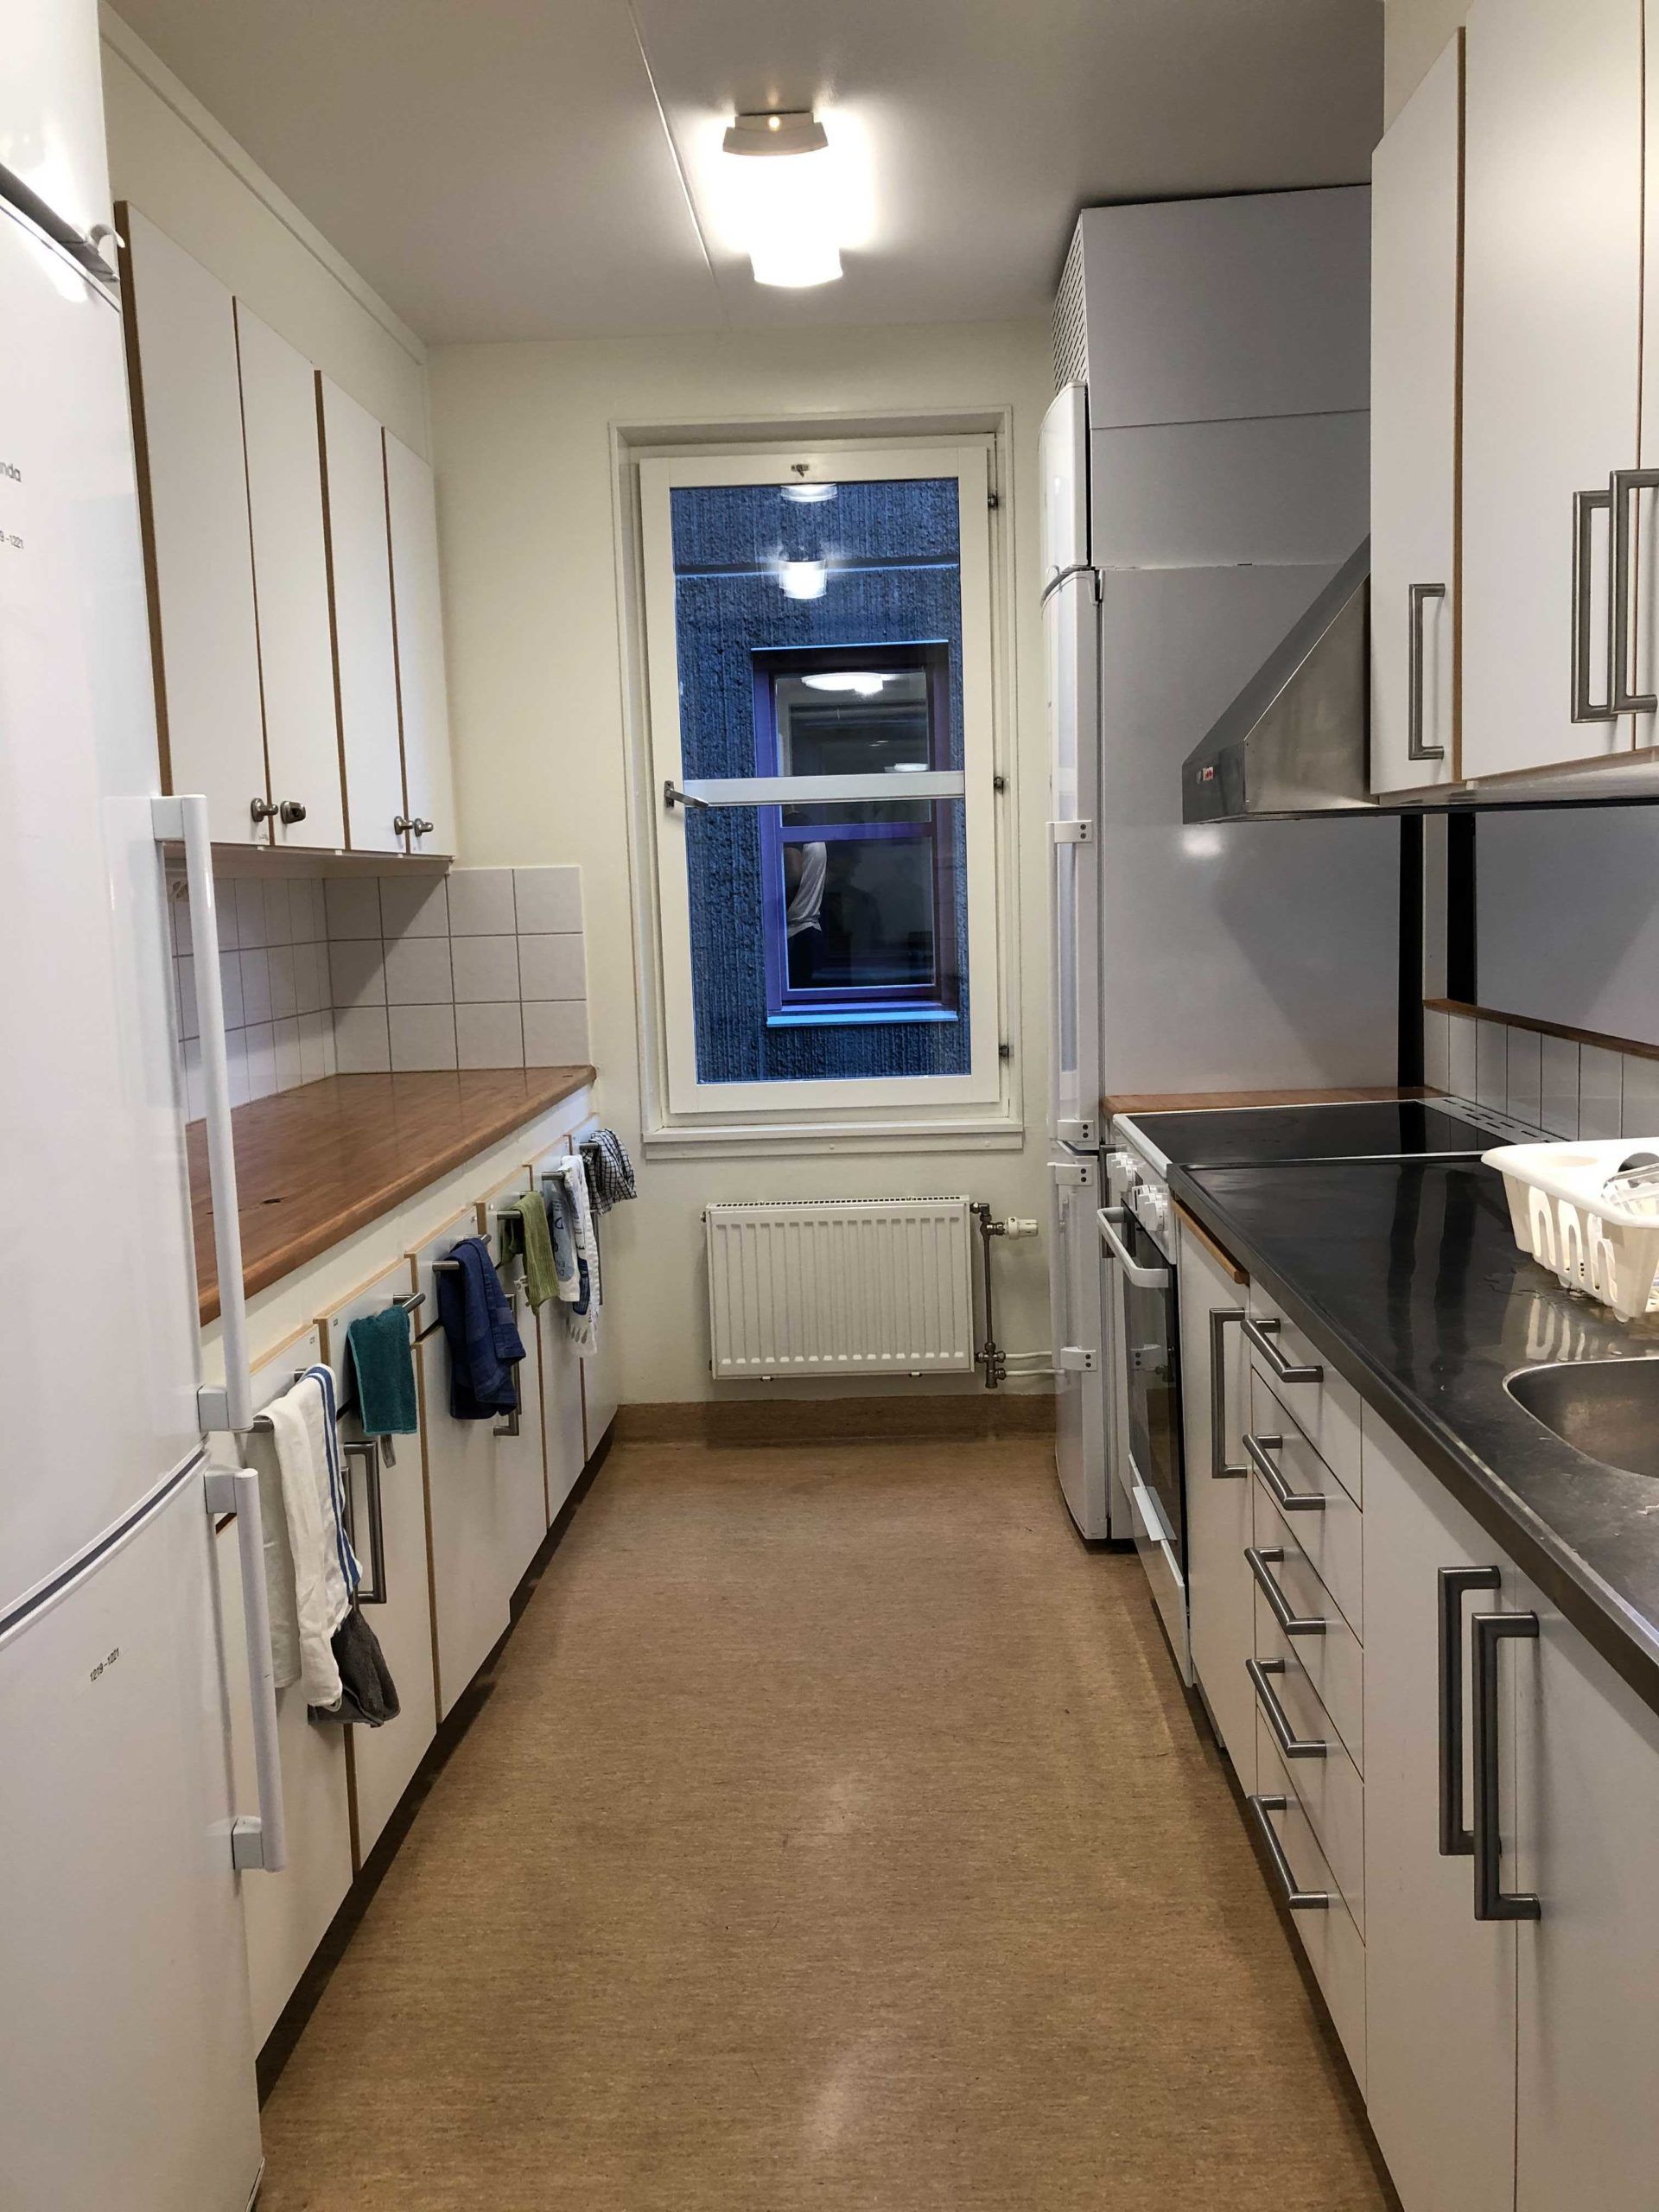 A picture of a shared student kitchen